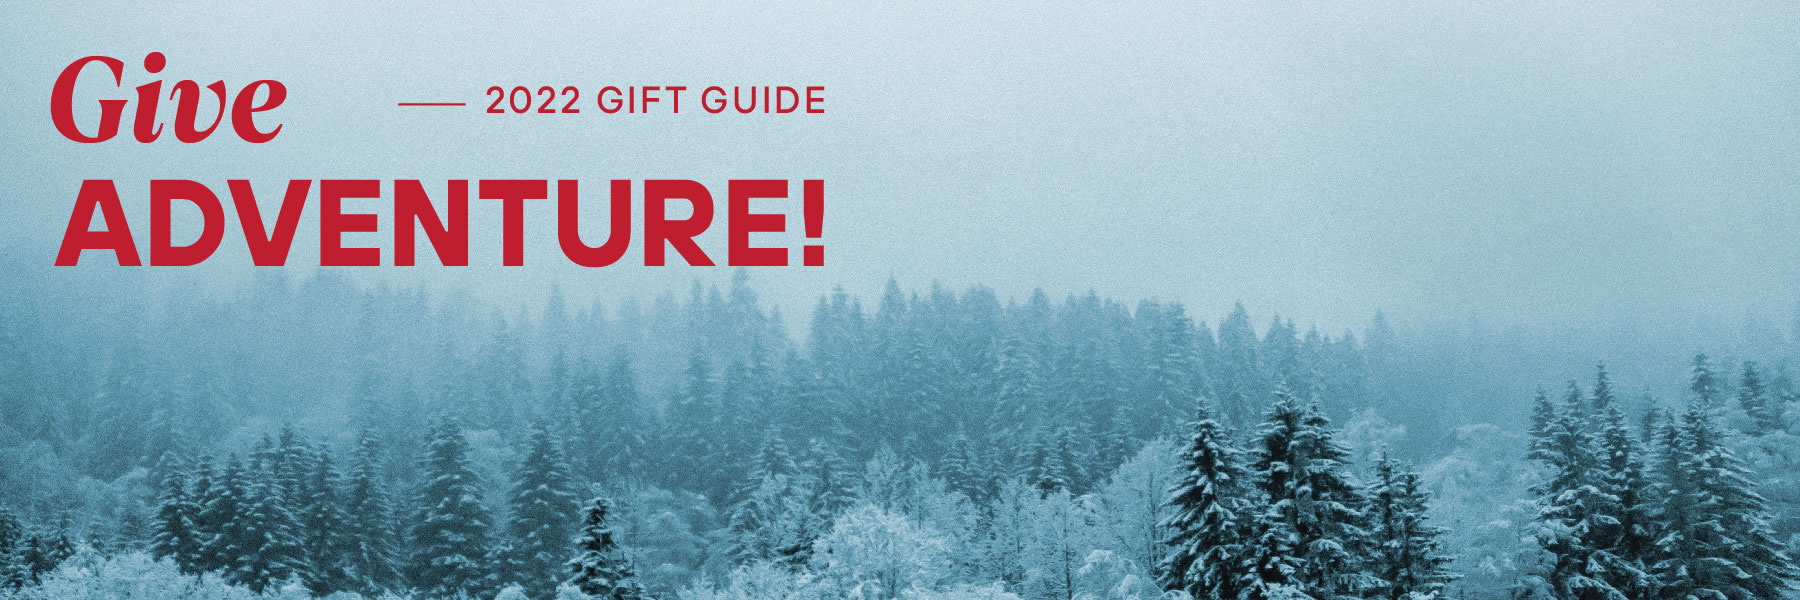 Give Adventure 2022 Gift Guide